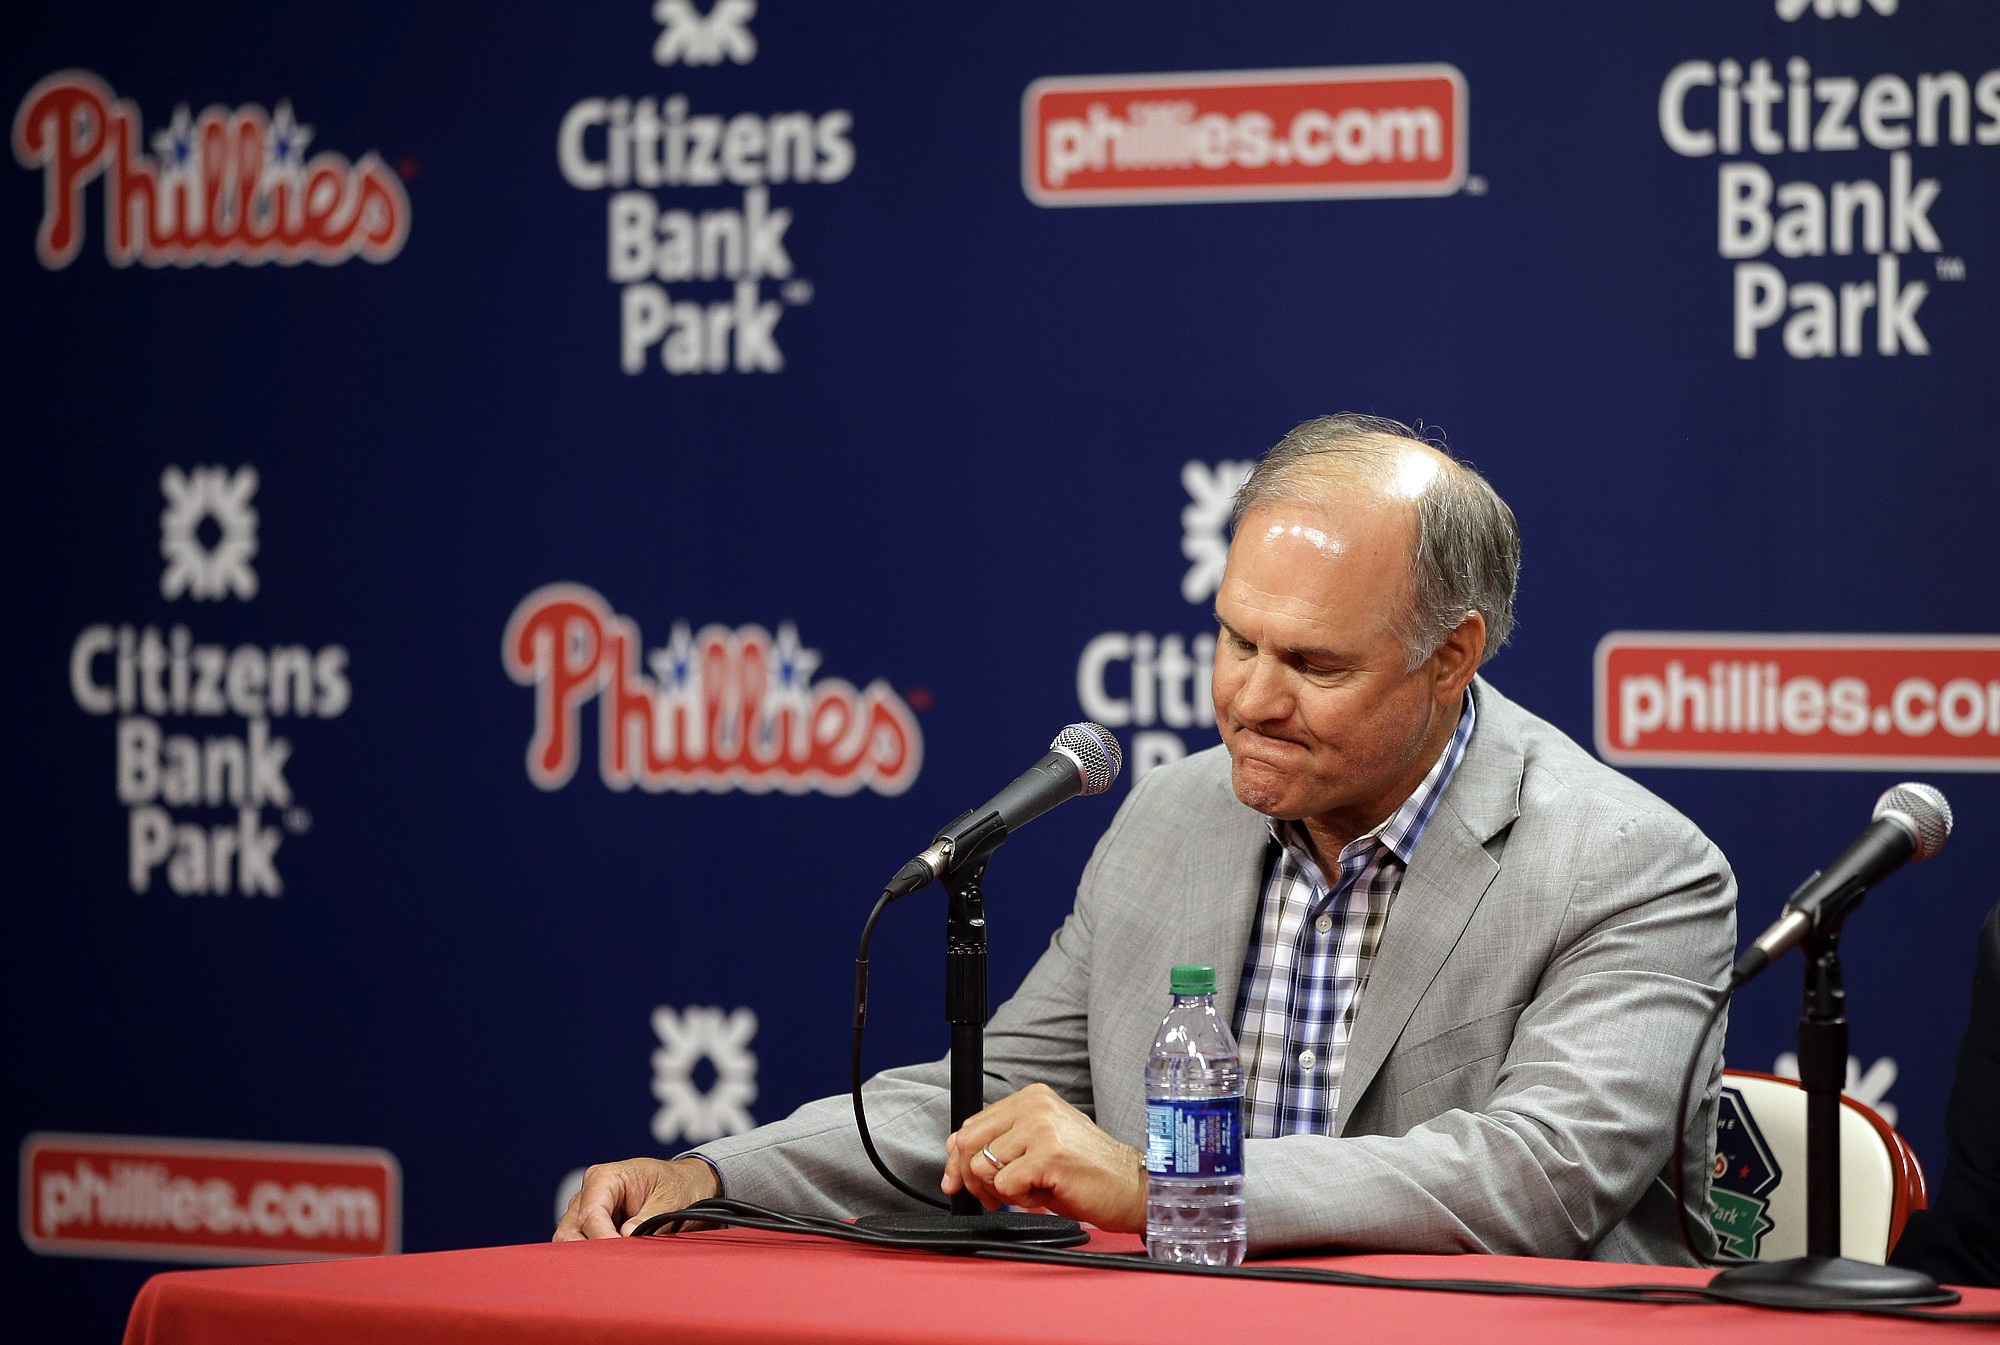 Philadelphia Phillies manager Ryne Sandberg pauses during a news conference where he announced his resignation, Friday, June 26, 2015, in Philadelphia.